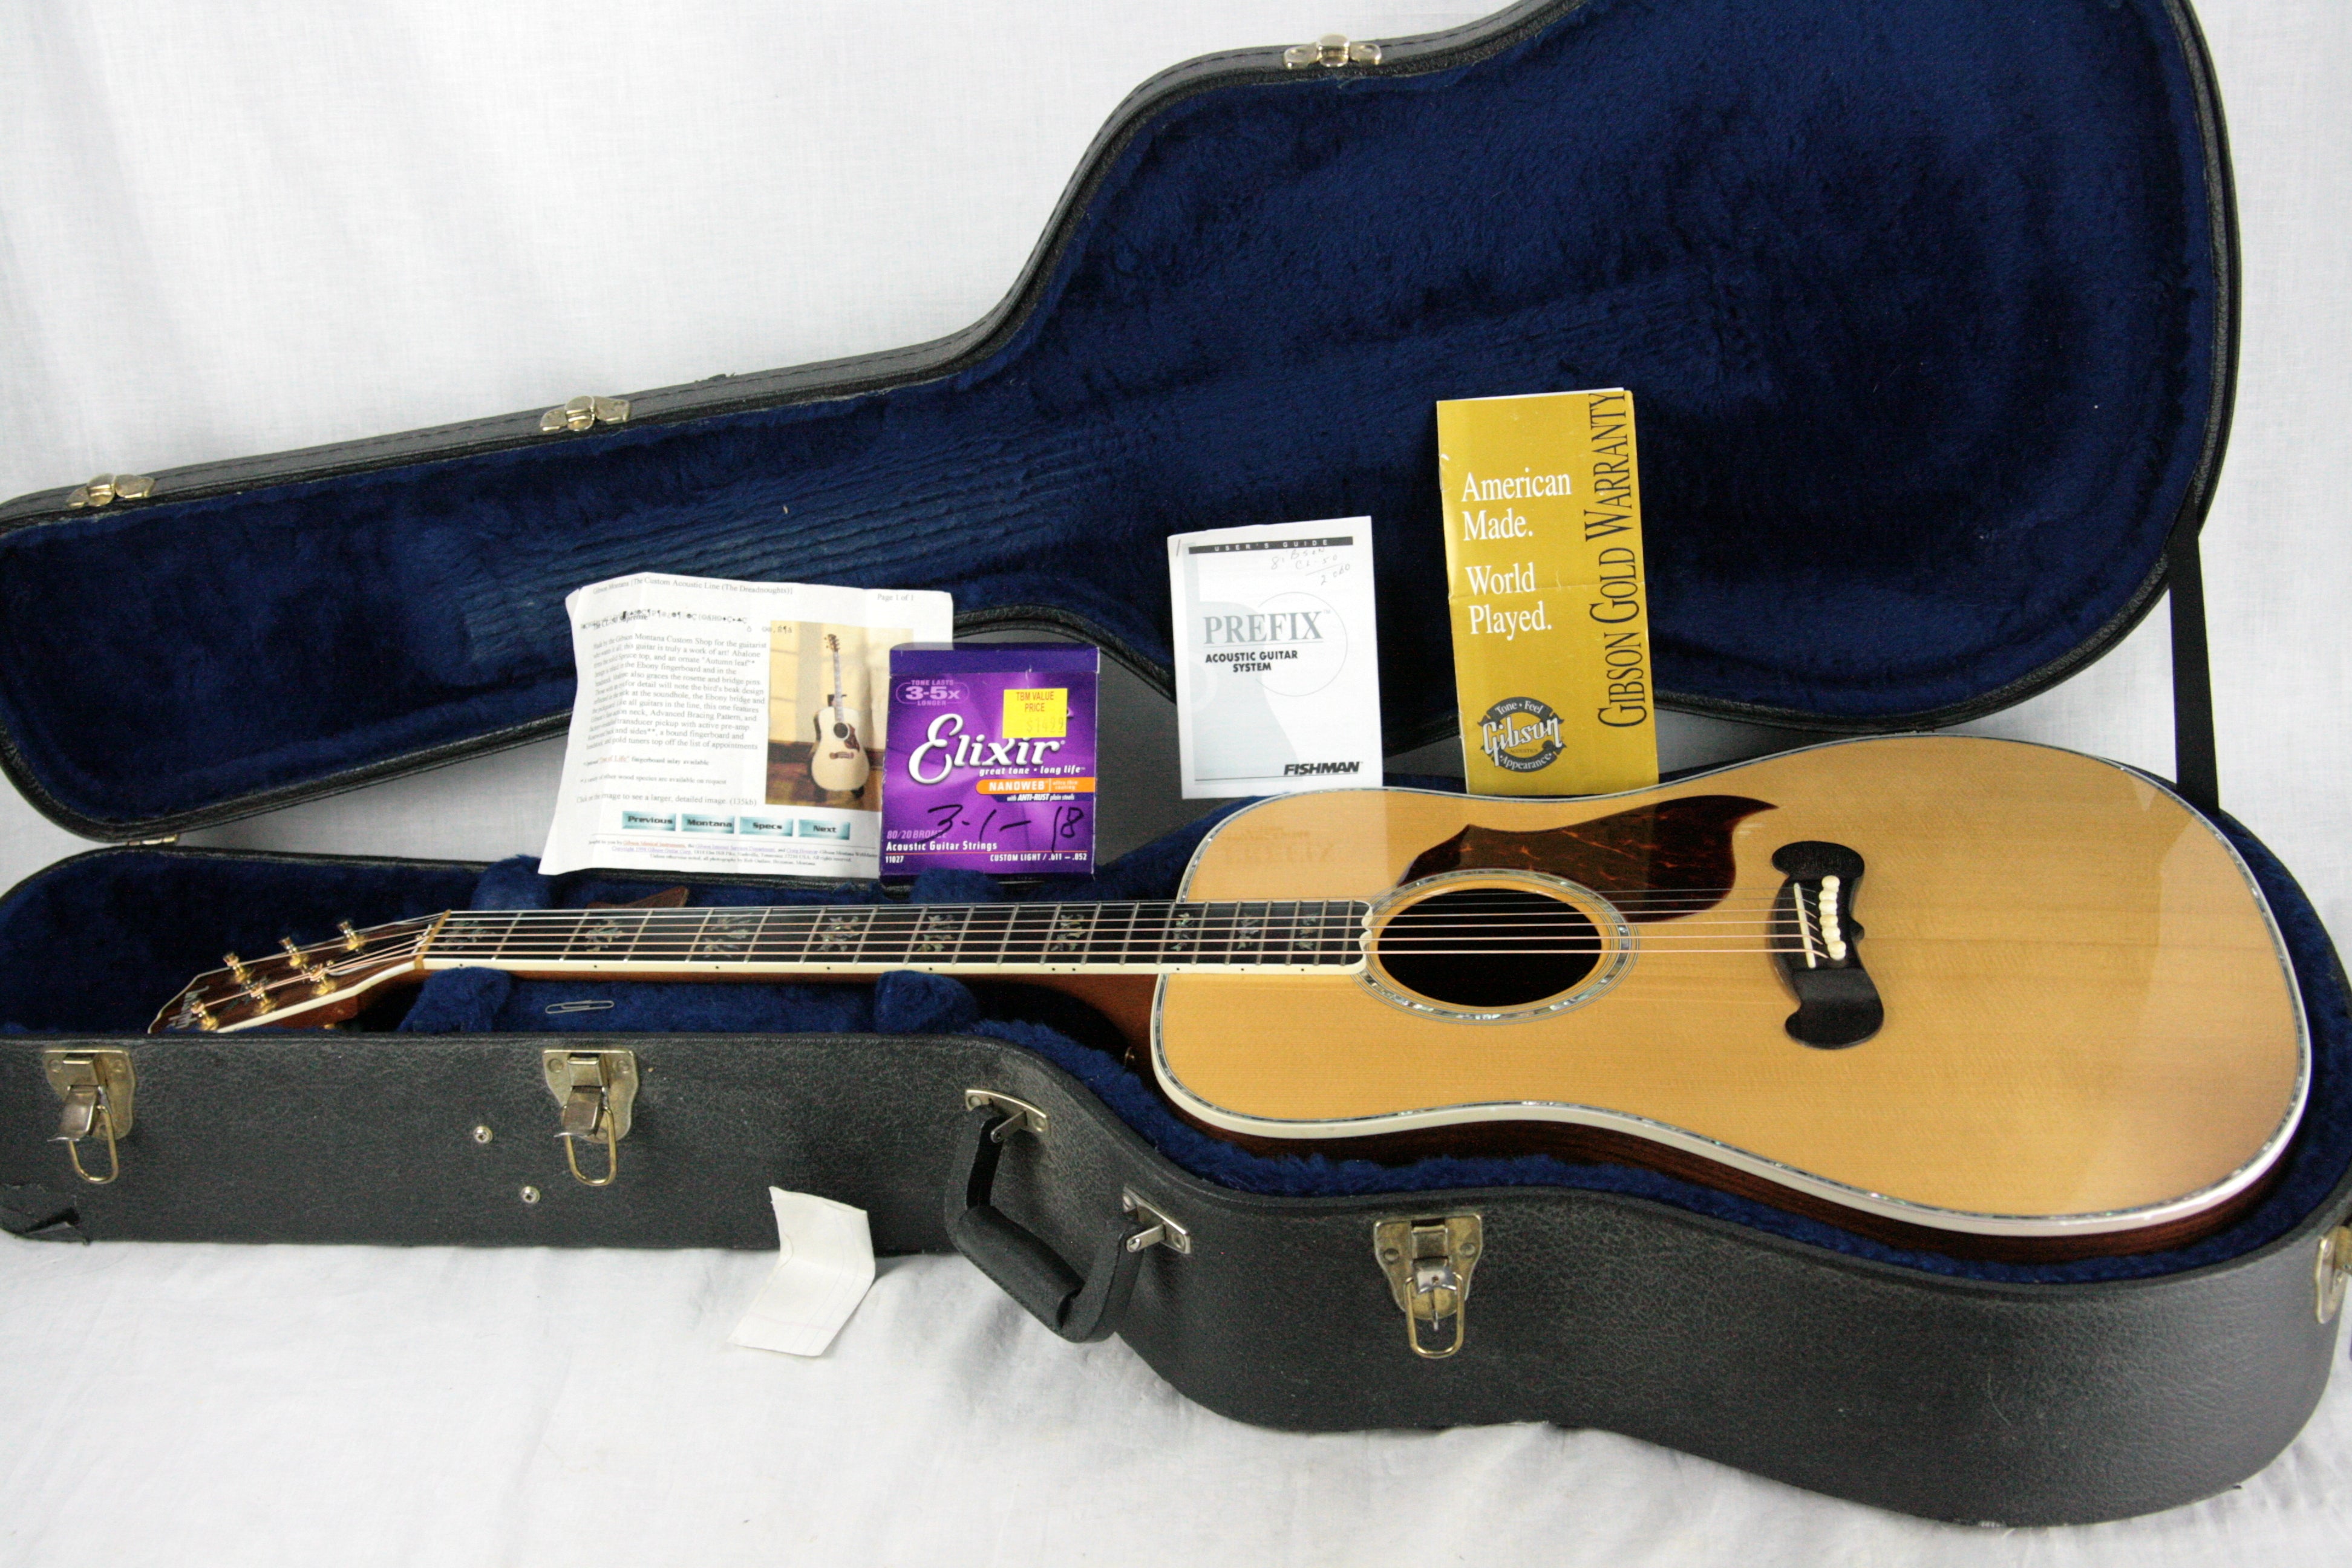 *SOLD*  1997 Gibson Custom Shop CL-50 SUPREME Acoustic Guitar! Abalone, Rosewood, Ebony! Very rare model!